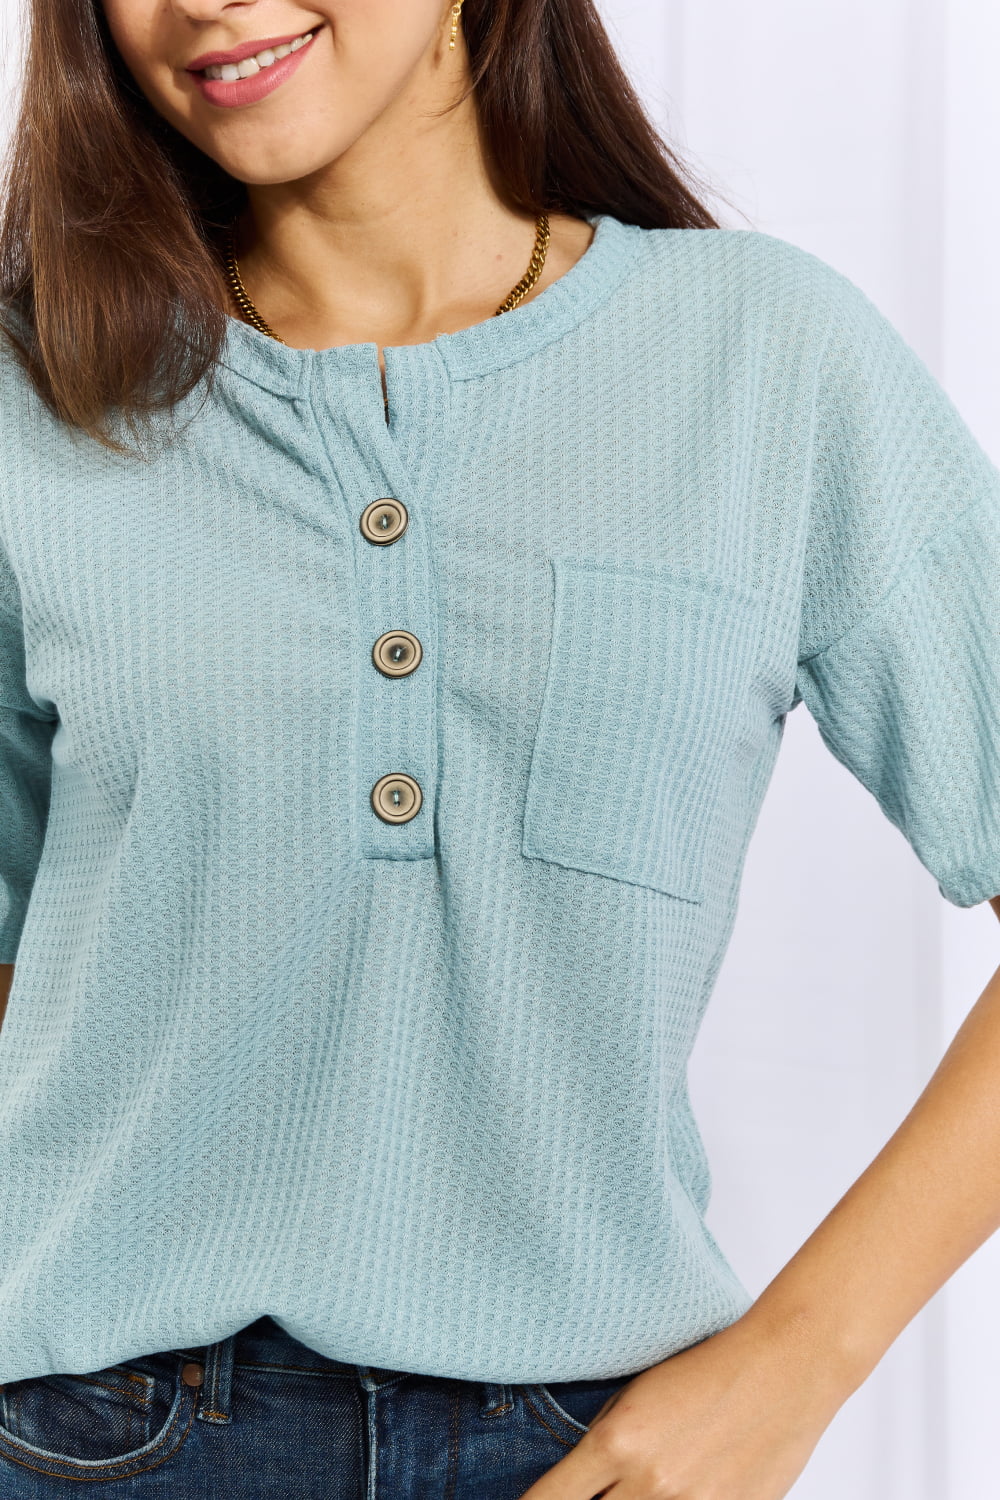 Heimish Made For You Full Size 1/4 Button Down Waffle Top in Blue - nailedmoms